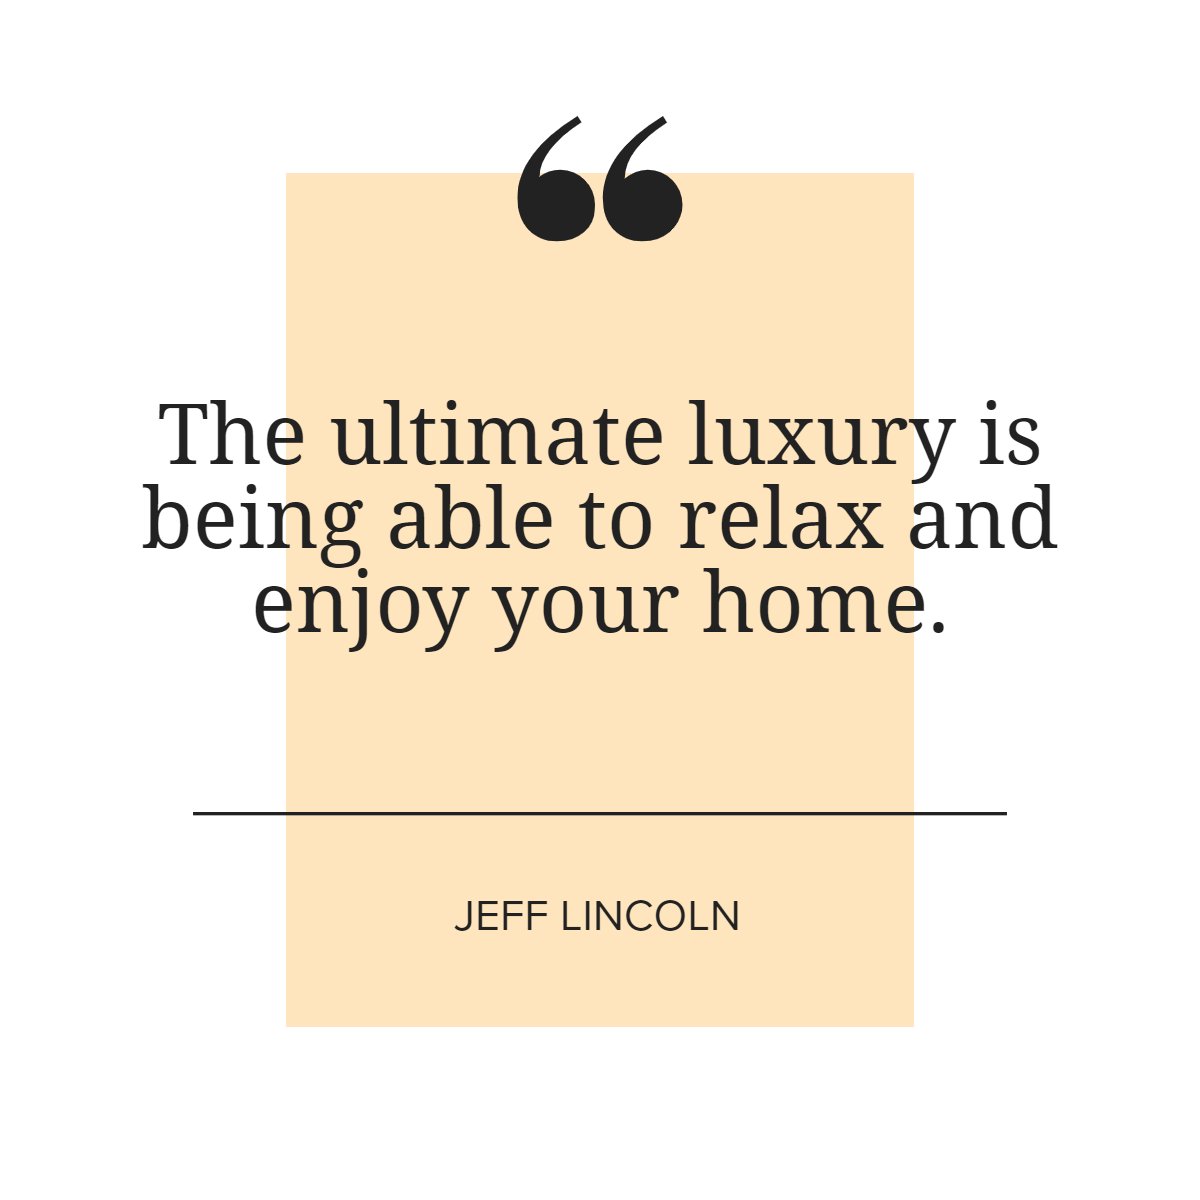 'The ultimate luxury is being able to relax and enjoy your home'
― Jeff Lincoln 📖

#luxurylifestyle #luxury #home #lifestyle #jefflincoln #quote #quoteoftheday
 #hotharfordhomesforsale #findyourdreamhomenow #marylanddreamhomes #realestategoals #sellyourhomewithme